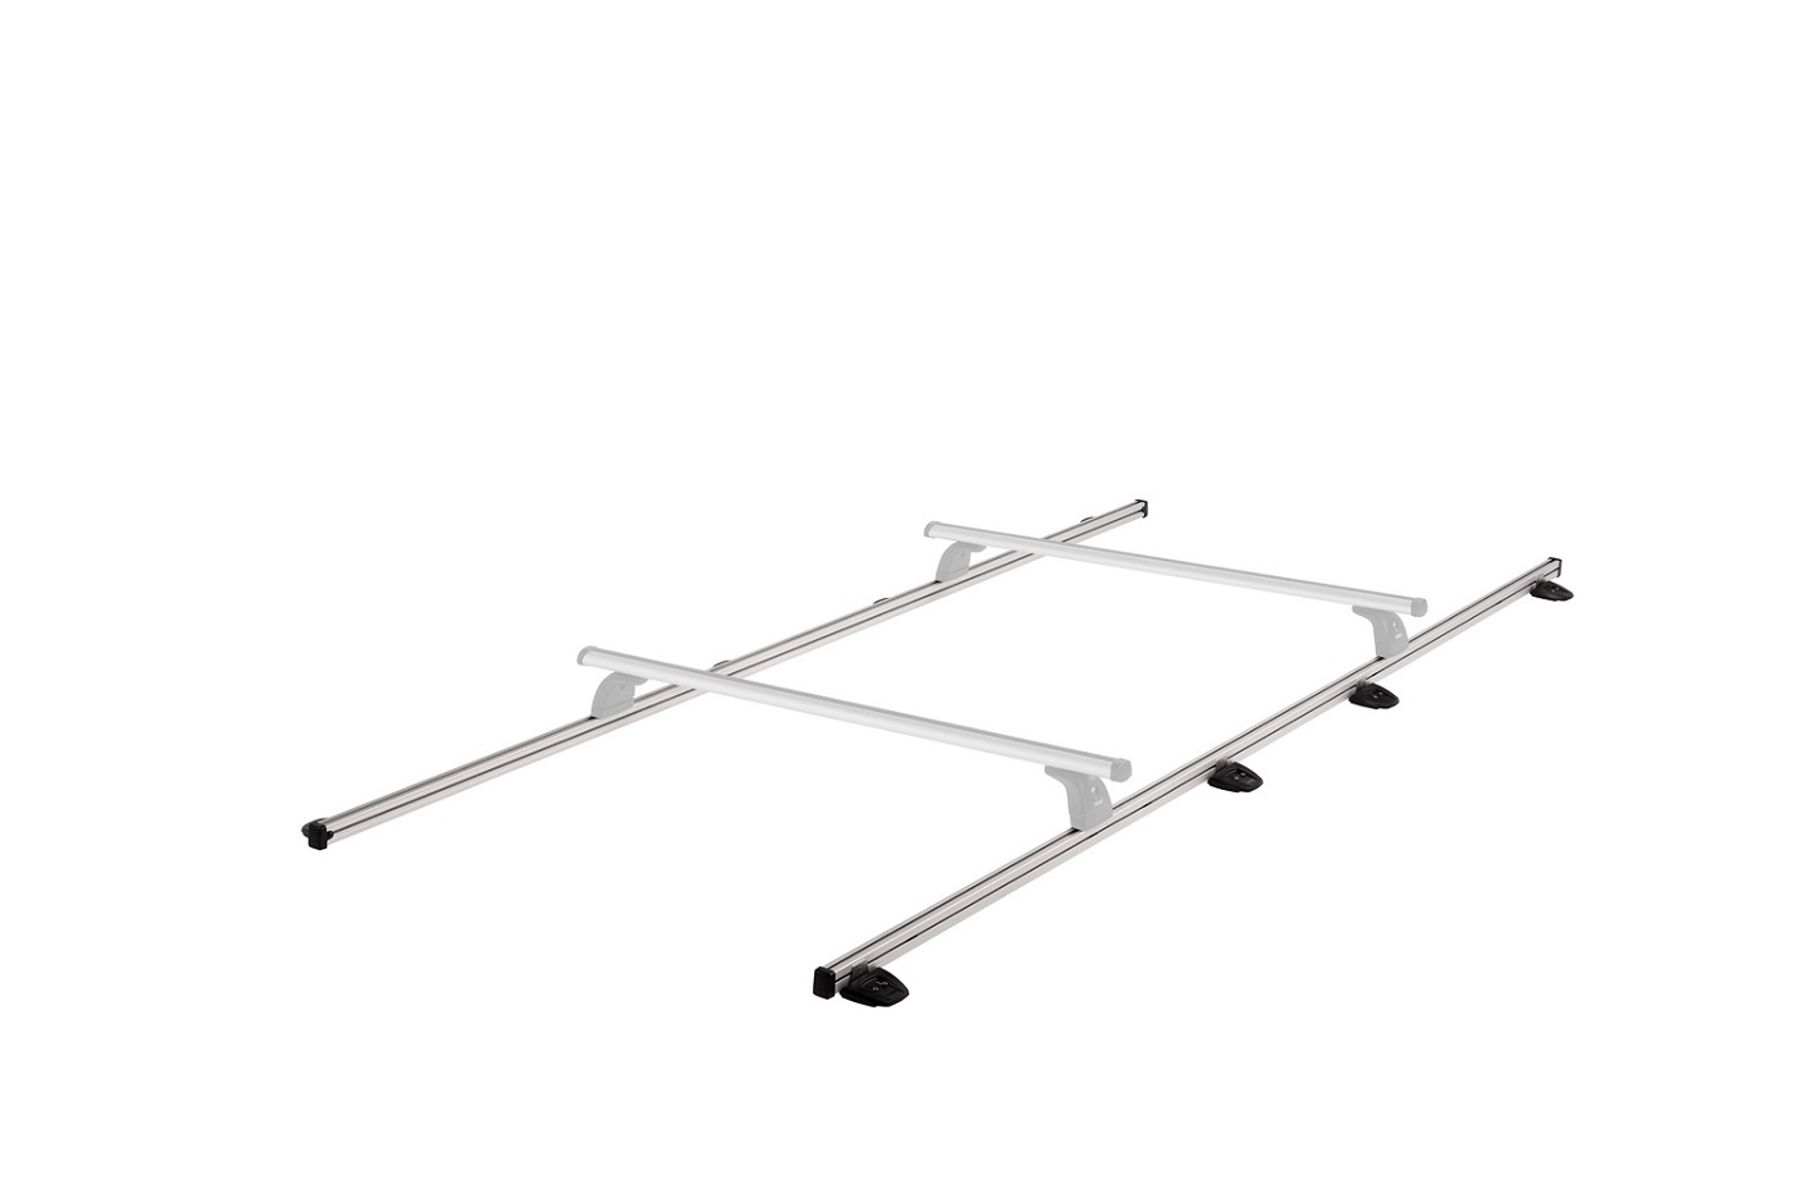 Thule SmartClamp System roof rack